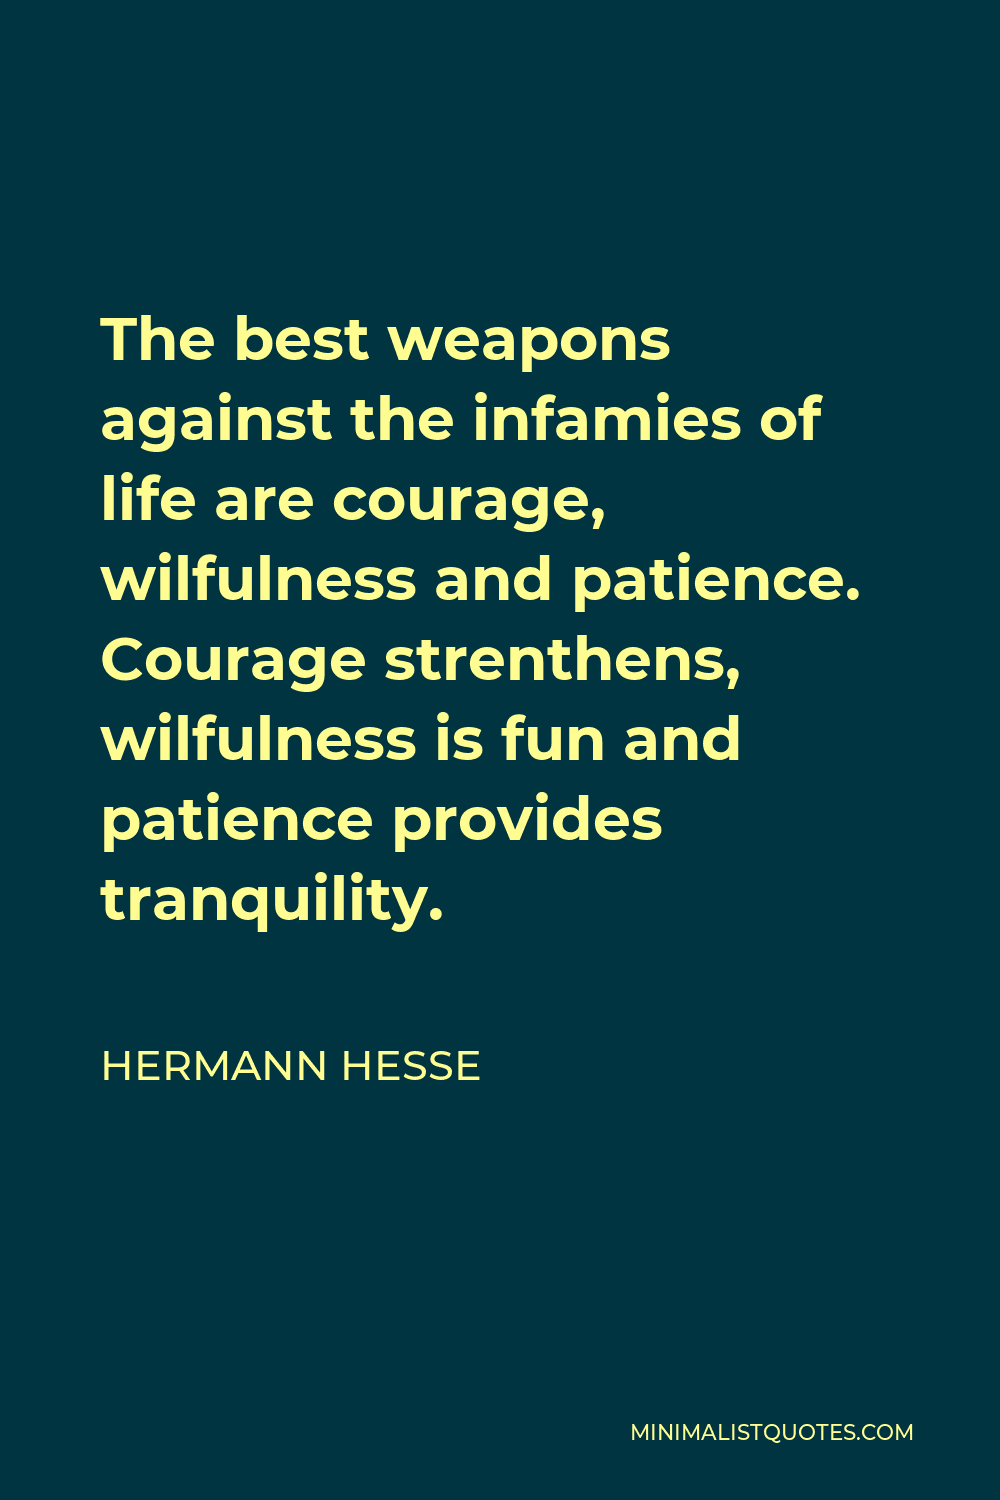 Hermann Hesse Quote - The best weapons against the infamies of life are courage, wilfulness and patience. Courage strenthens, wilfulness is fun and patience provides tranquility.